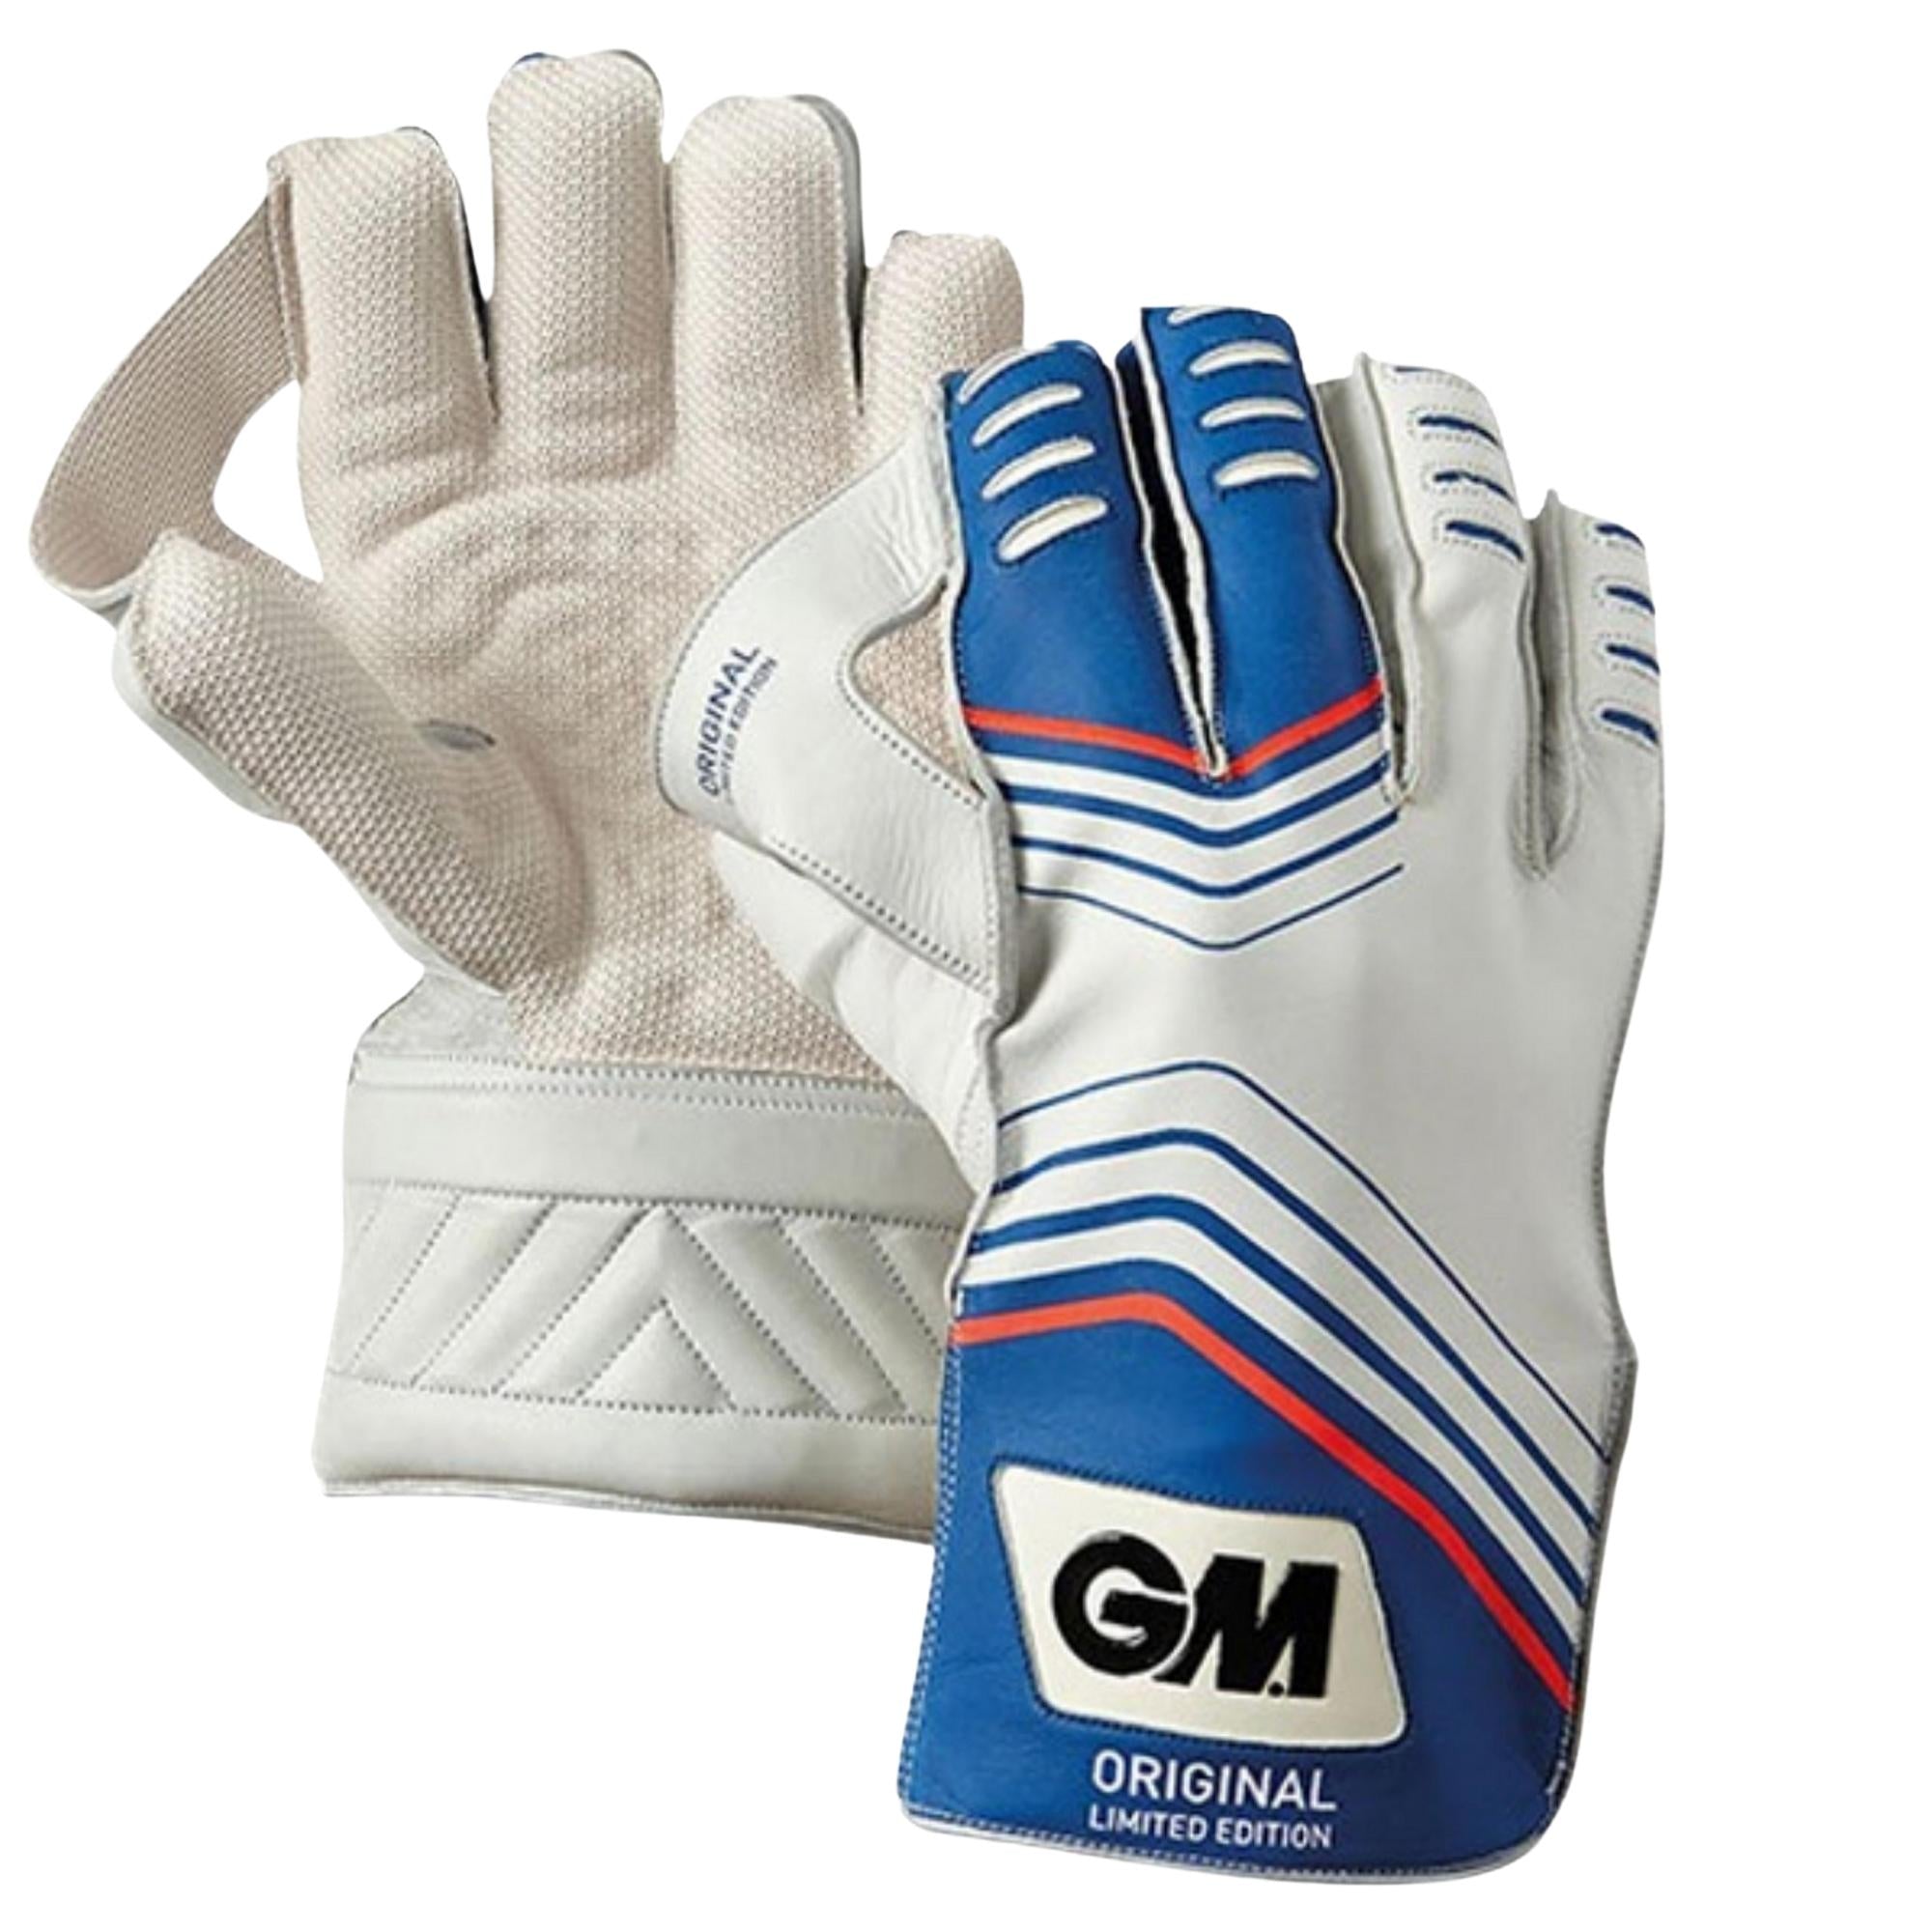 GM Original Limited Edition Blue Wicket Keeping Gloves